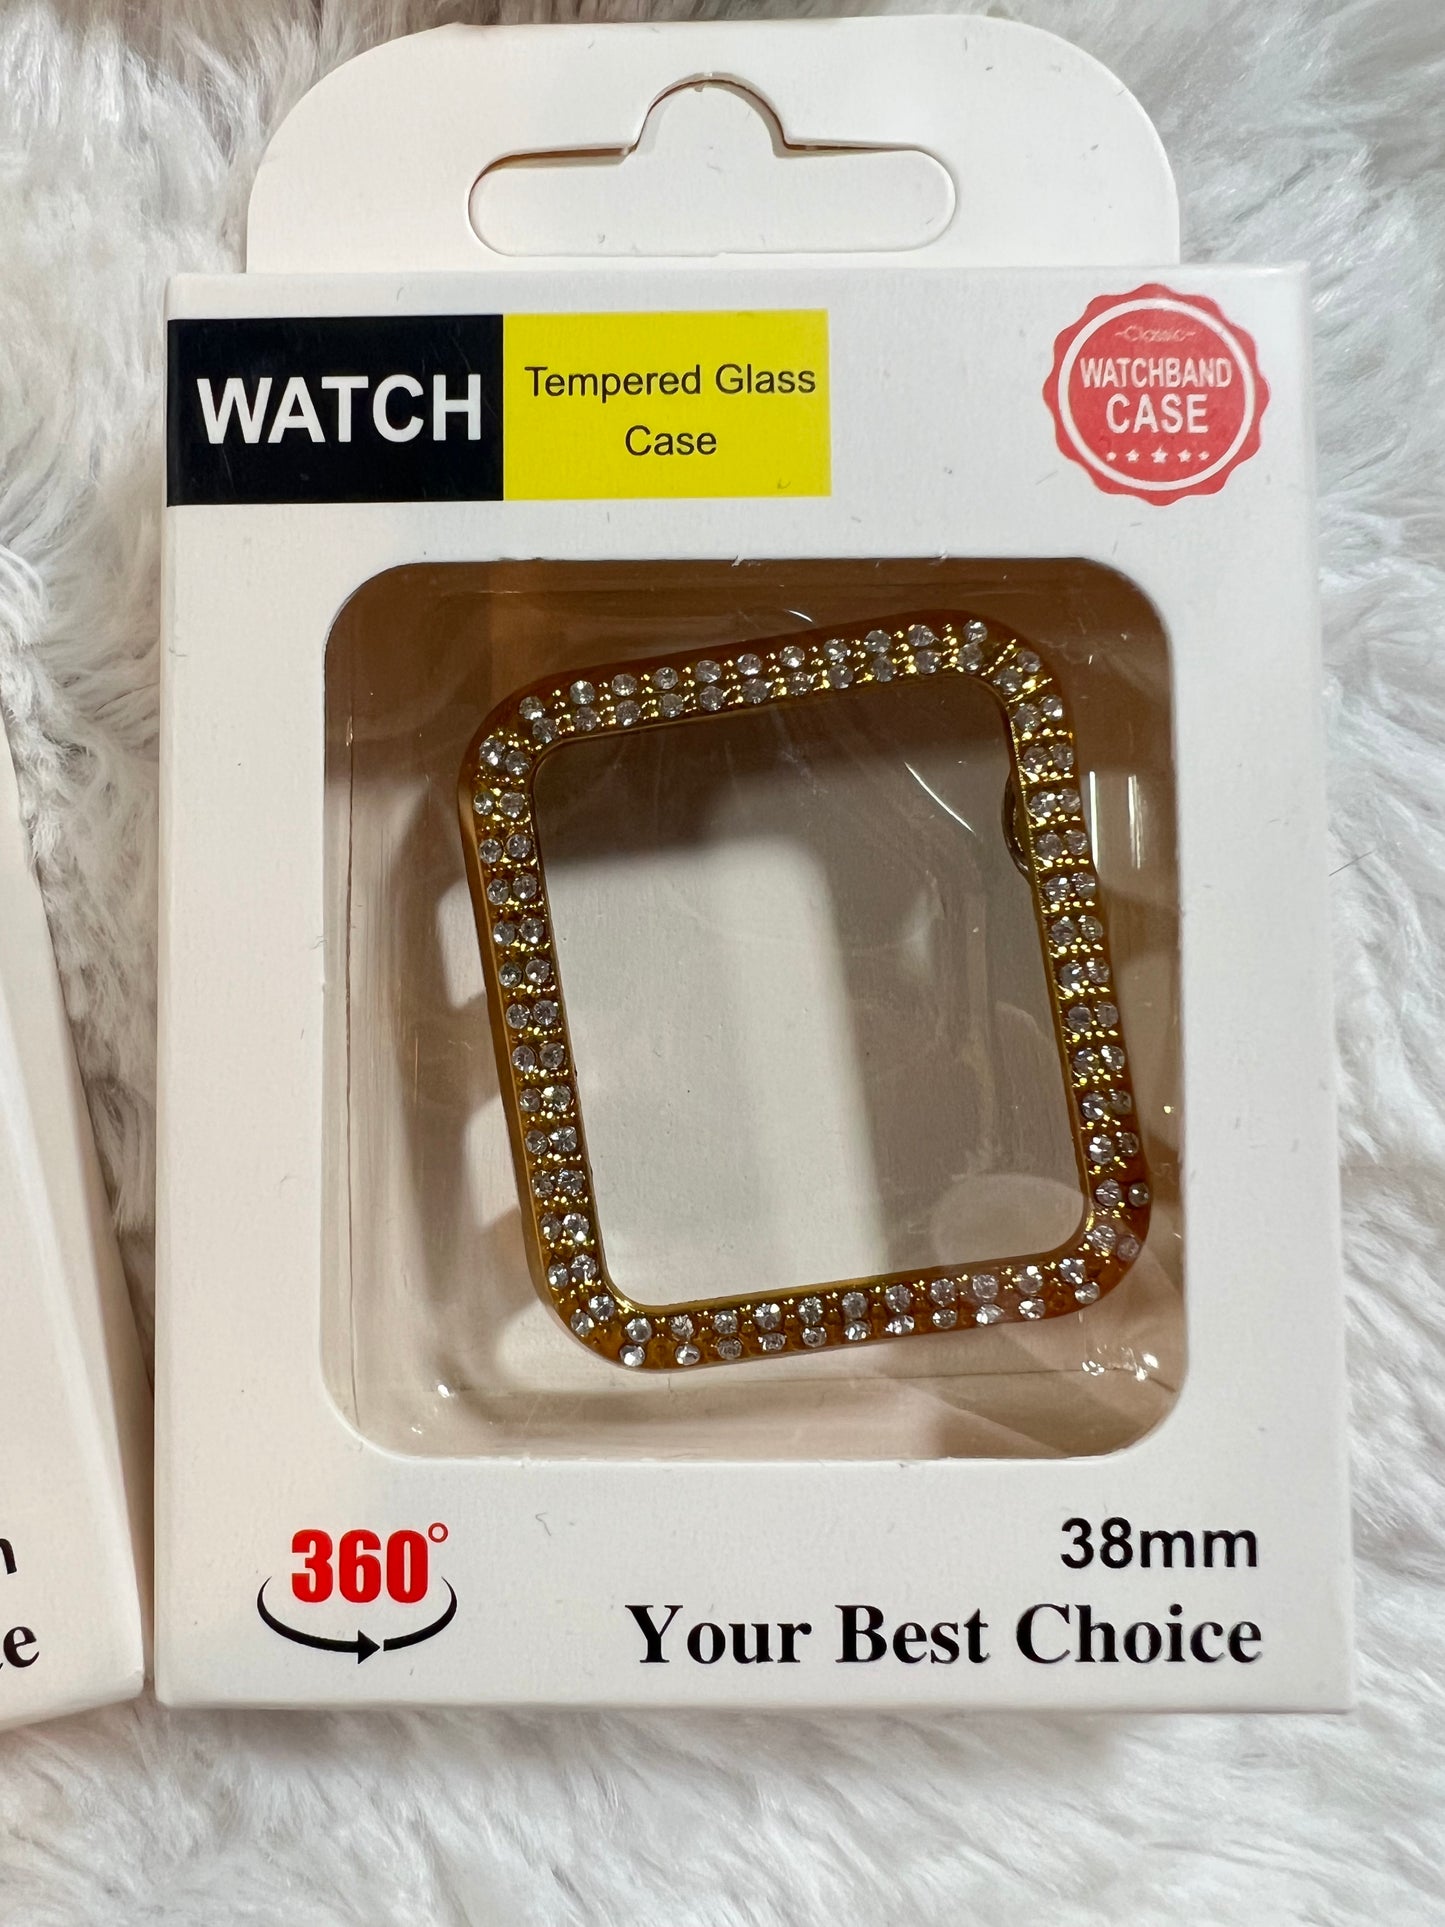 38mm smart watch tempered glass case